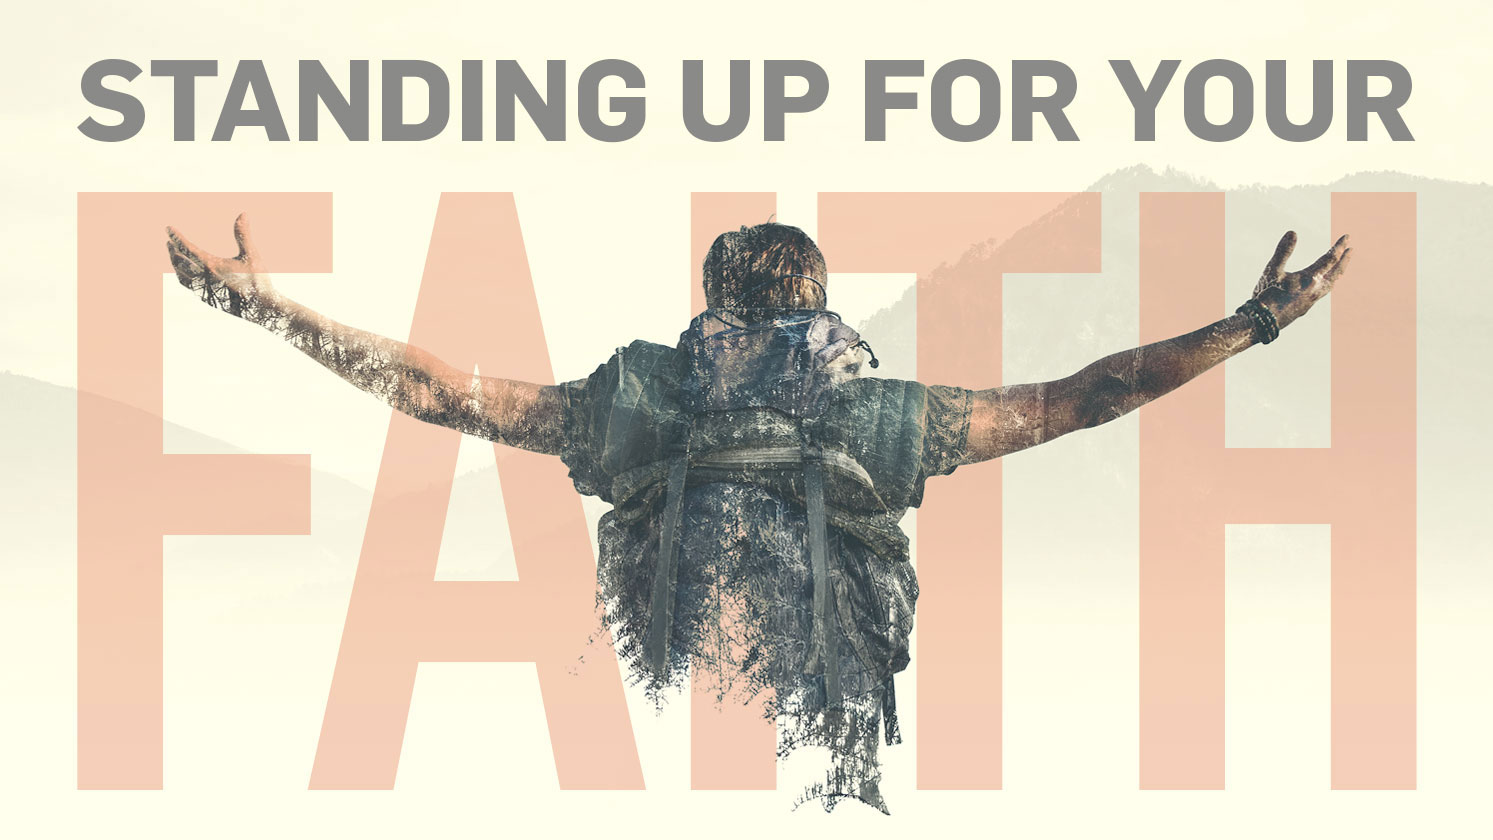 Standing Up for Your Faith